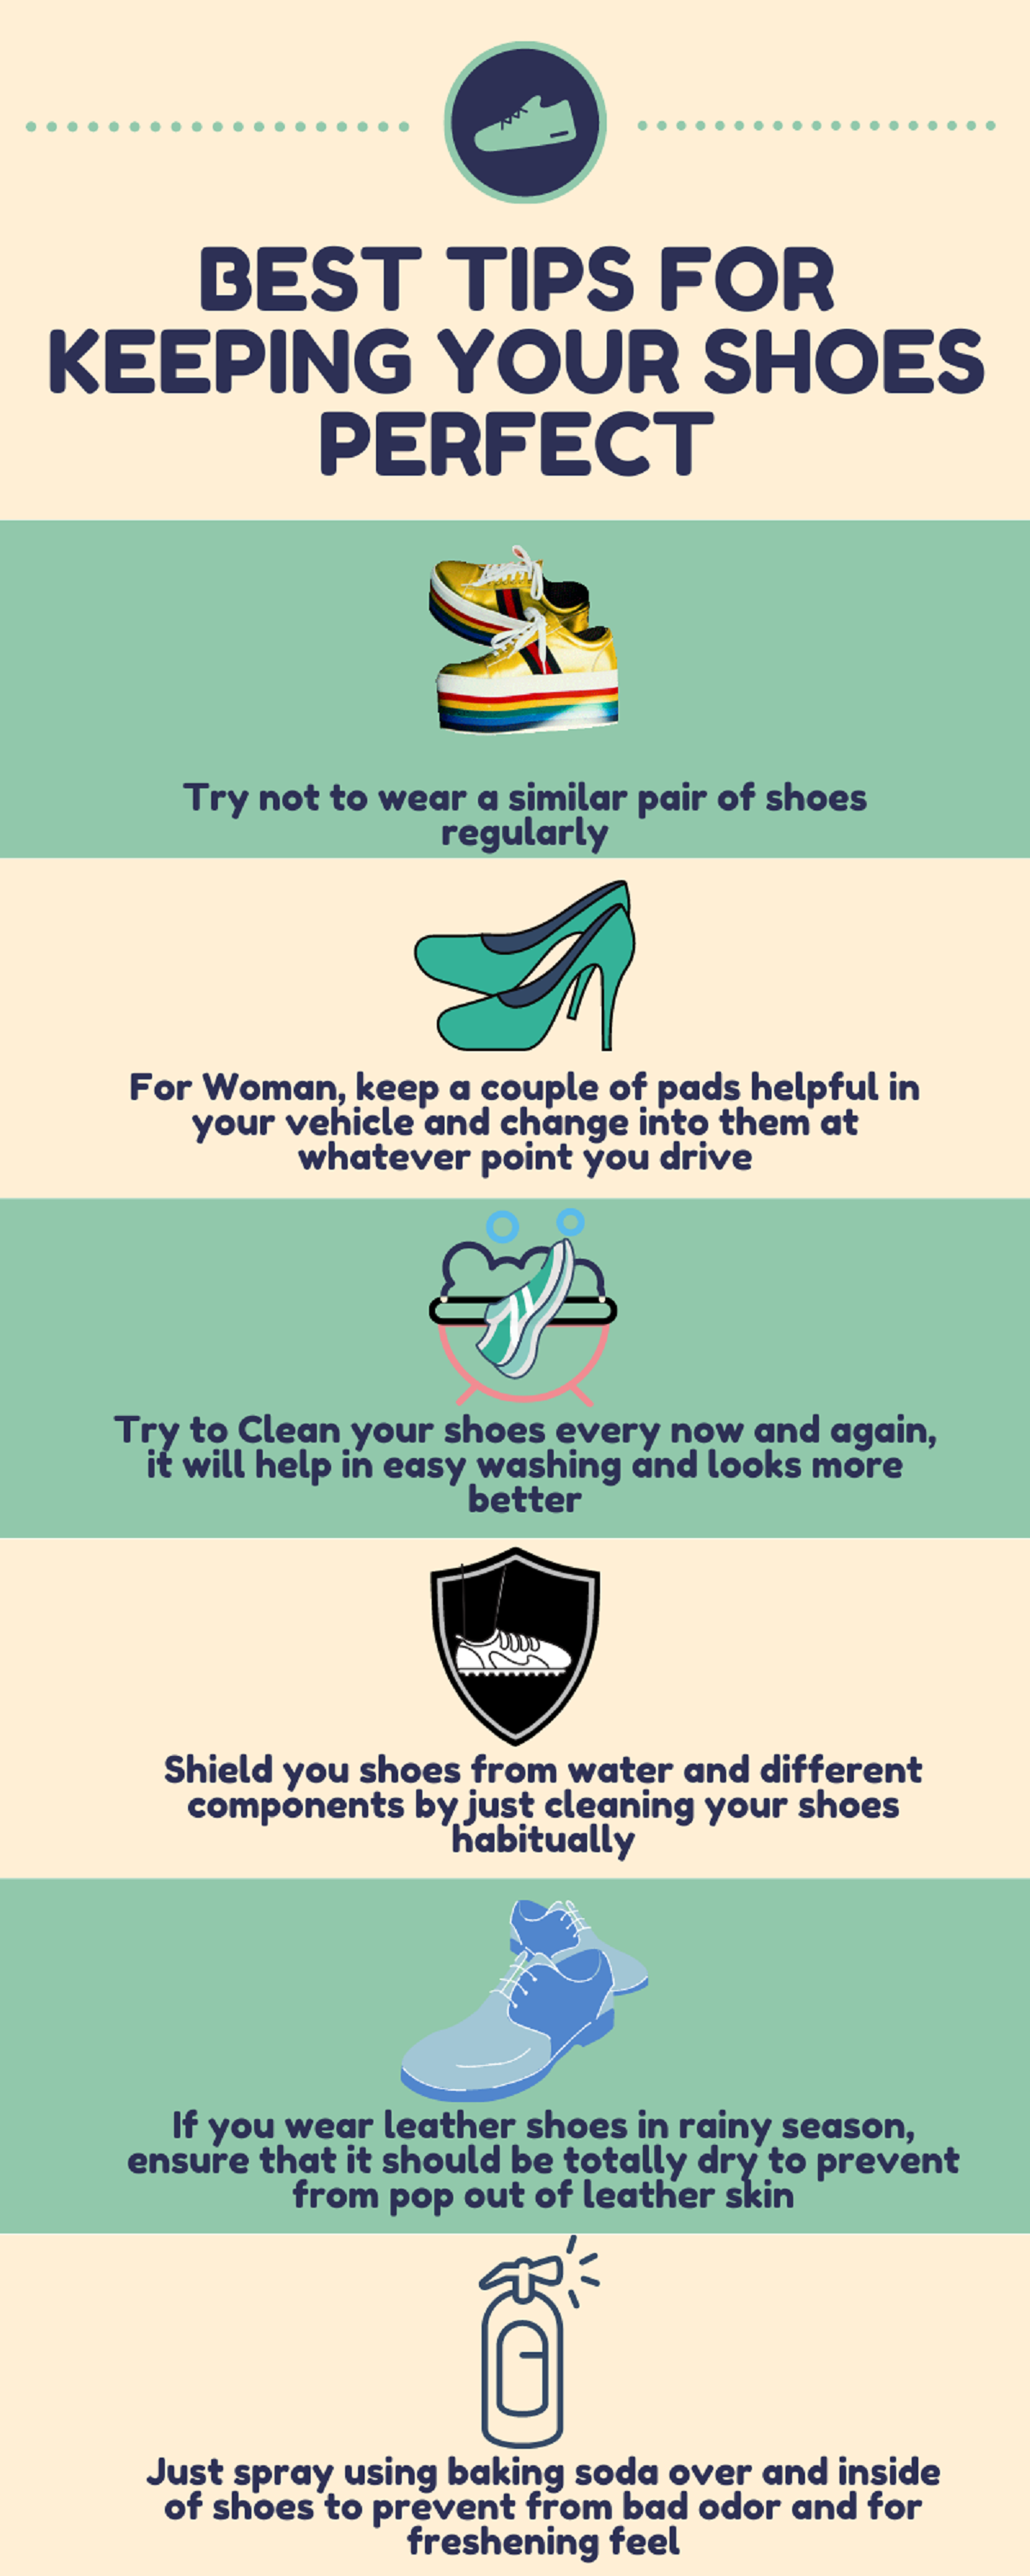 best-tips-for-keeping-your-shoes-perfect-infographic